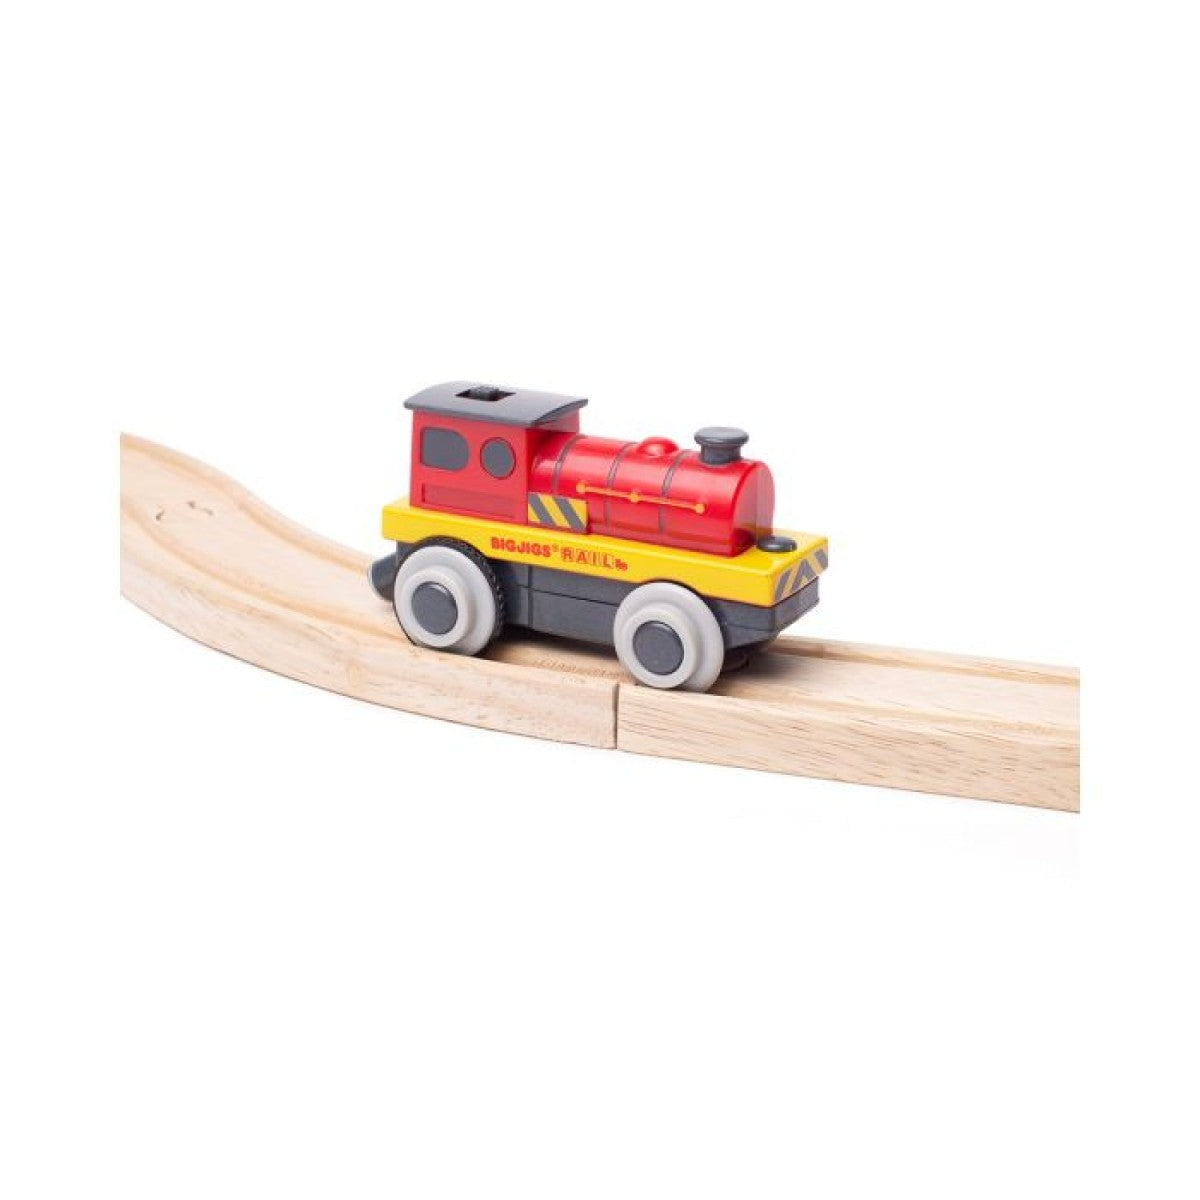 Mighty Red Locomotive Battery operated